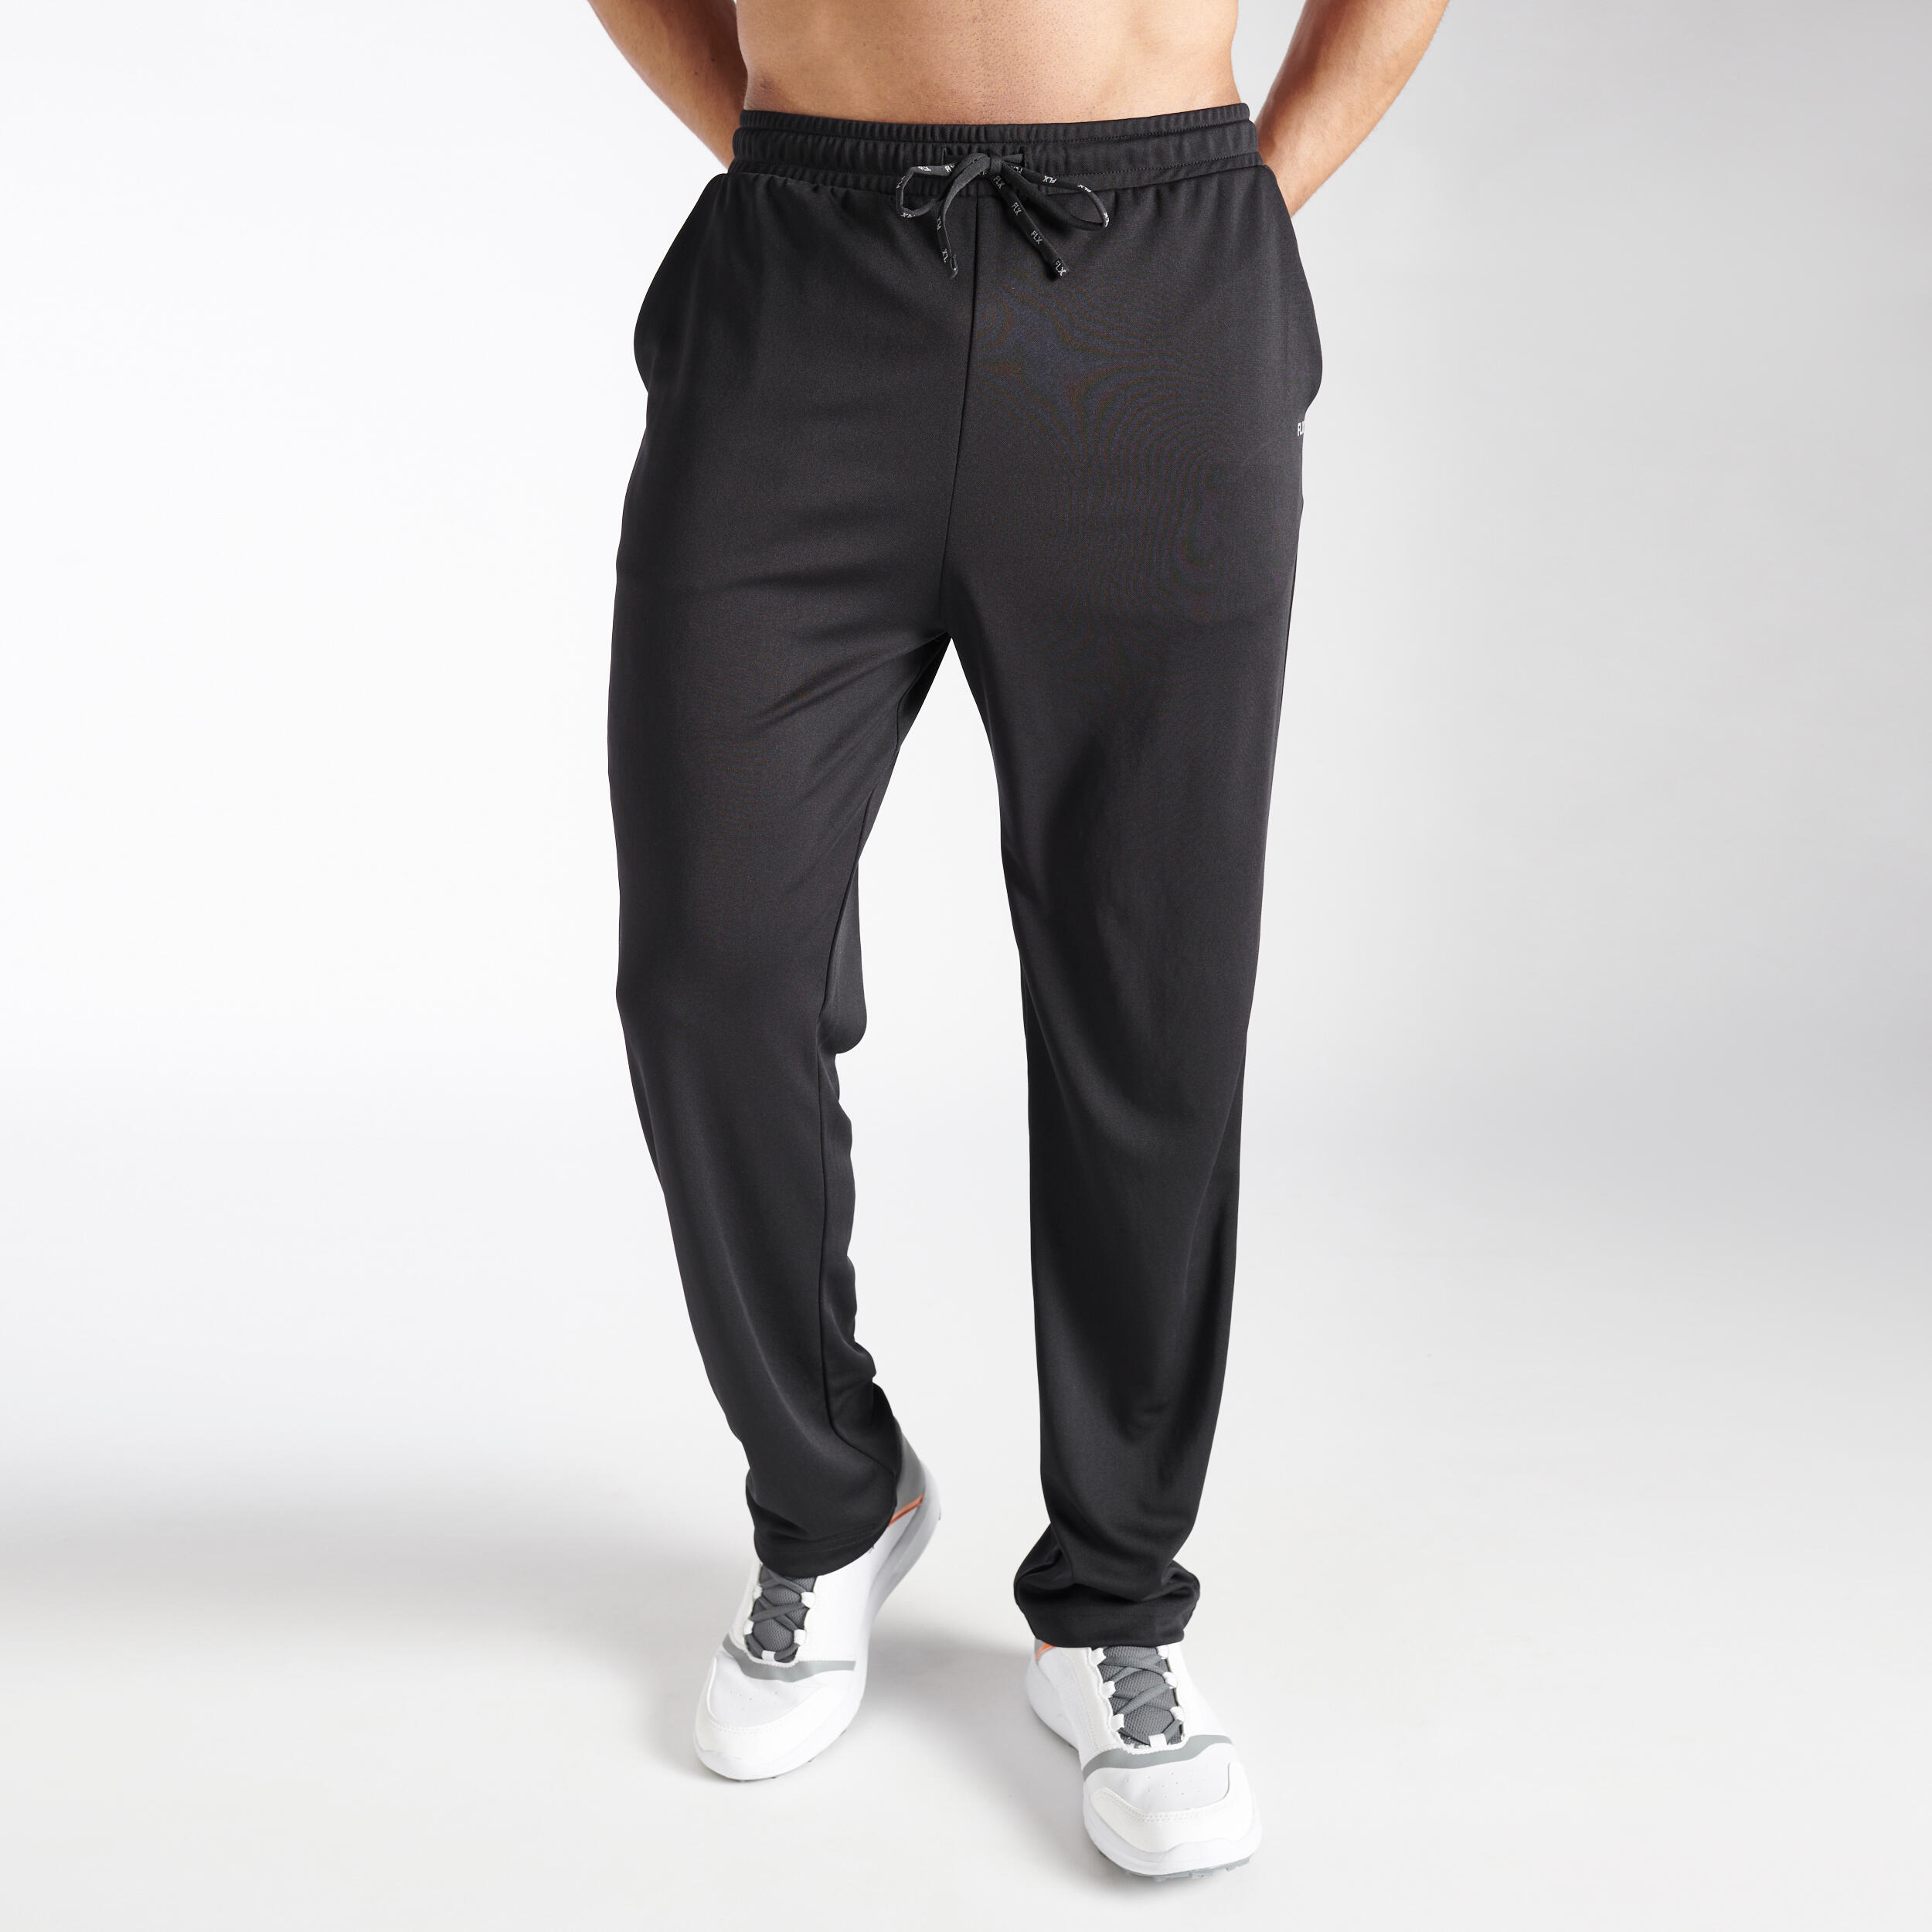 MEN'S CRICKET STRAIGHT FIT TROUSER CTS 500 BLACK